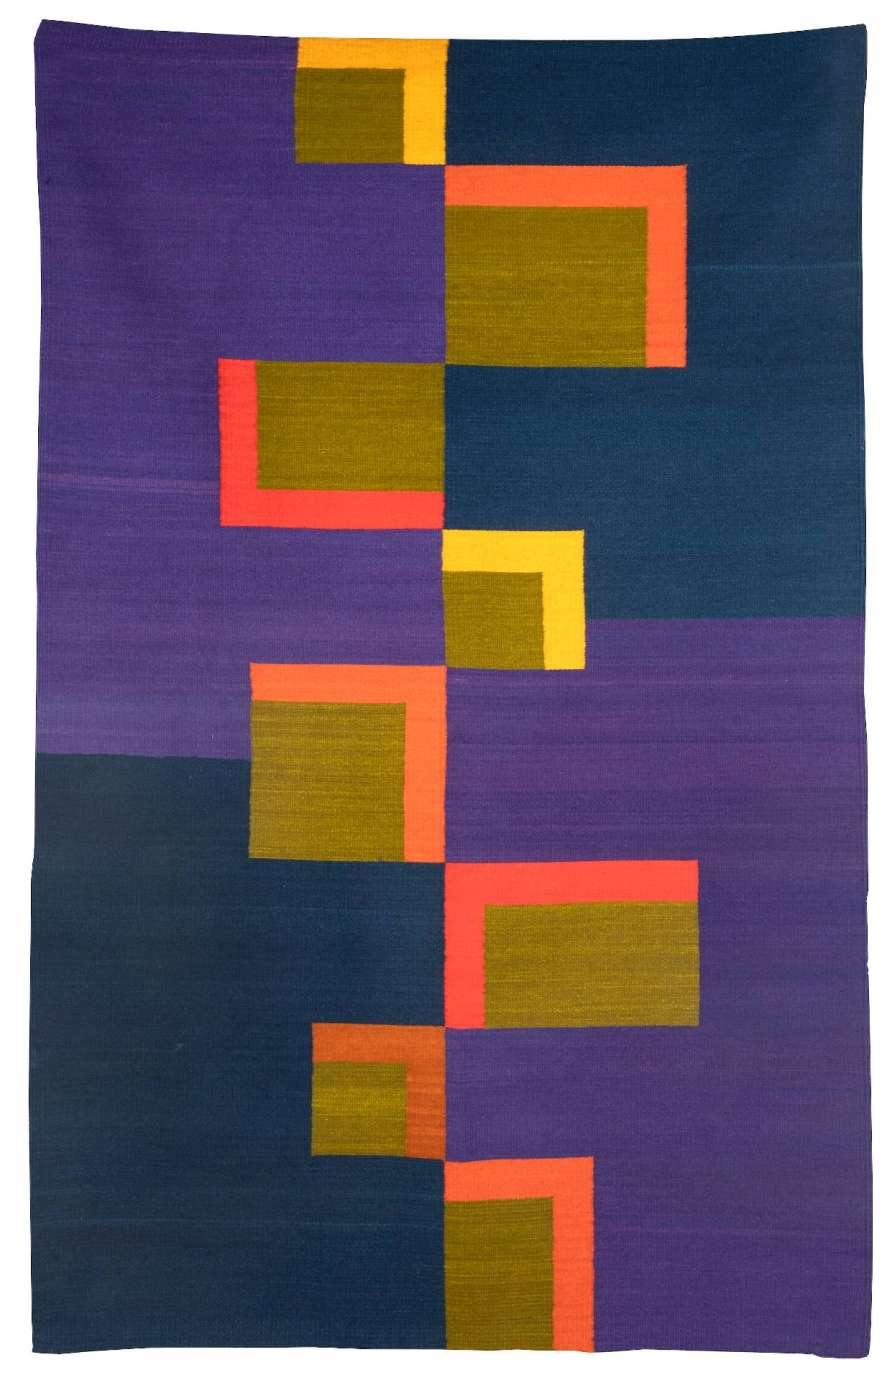 A deep blue and purple textile with a red, yellow, and brown staggered box design down the middle by Martha Clippinger